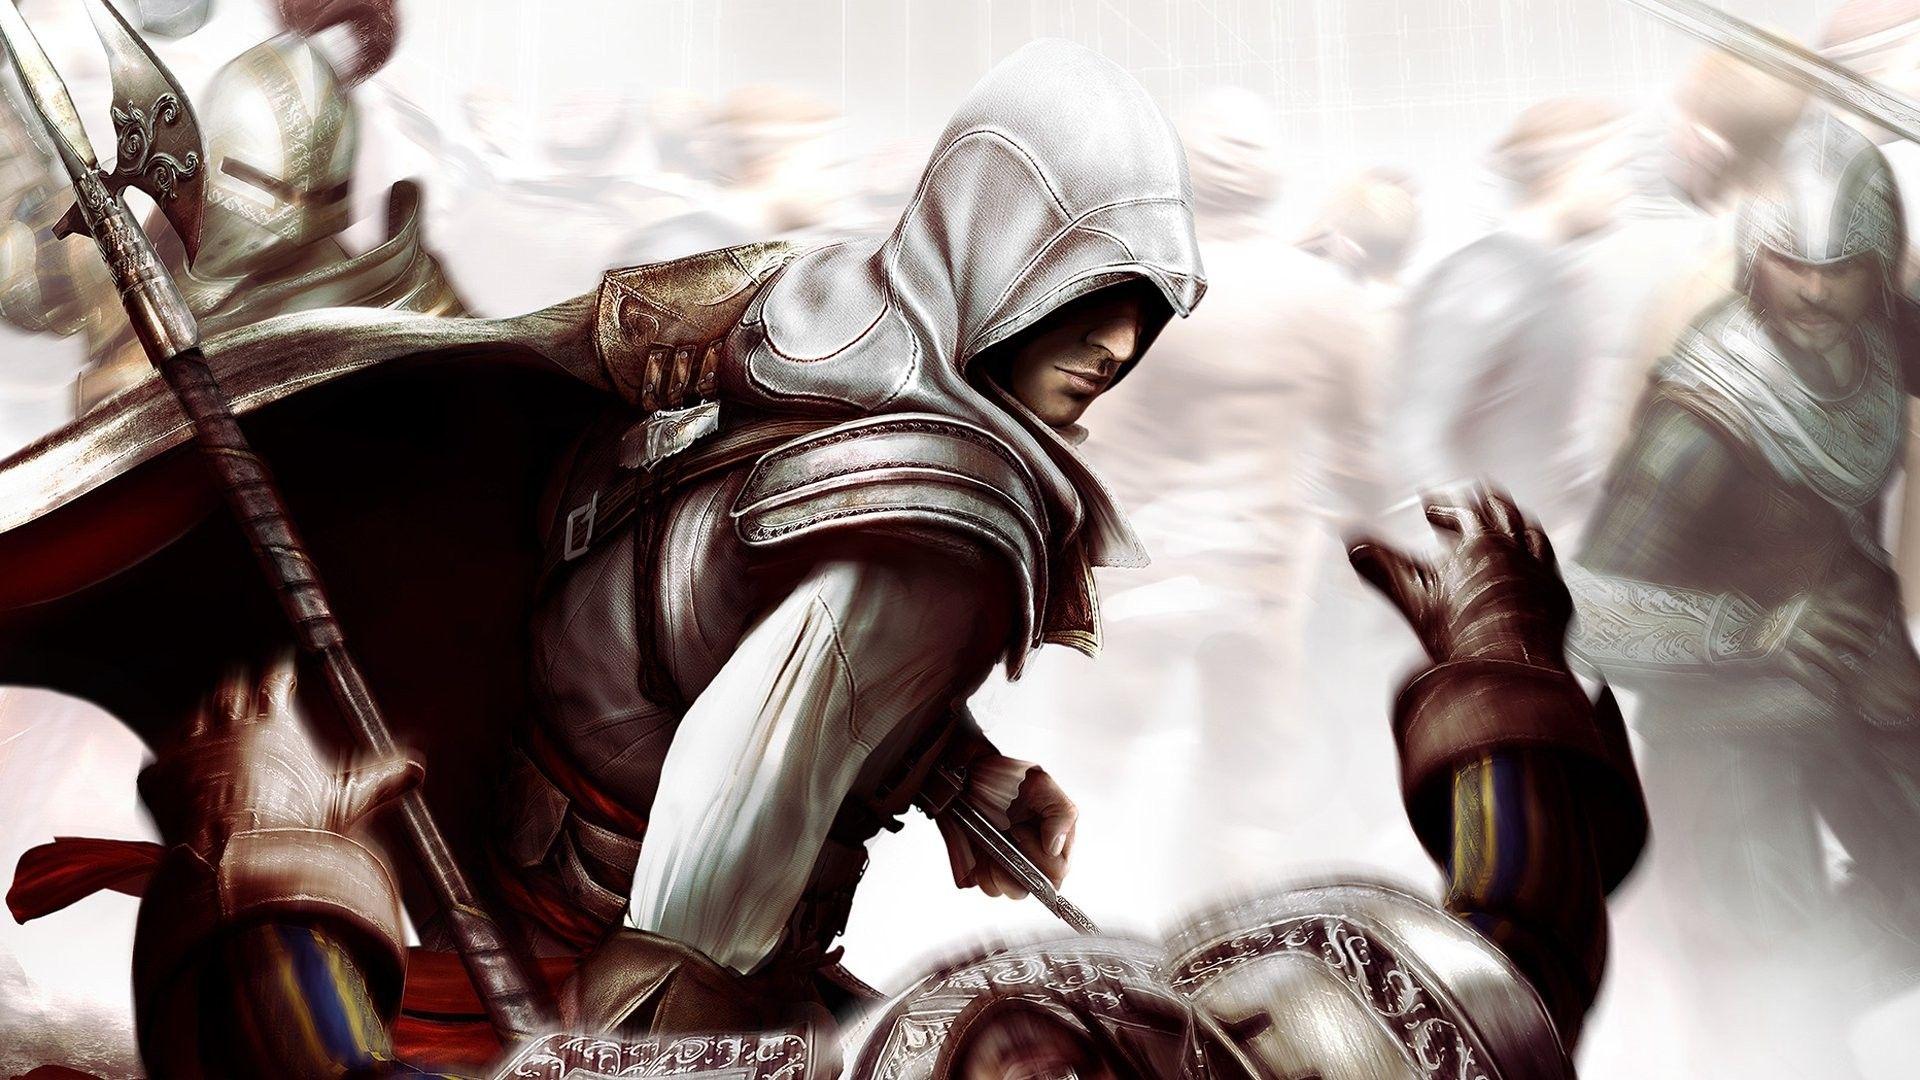 best Assassin's Creed games: Ezio Audiotore assassinating a person